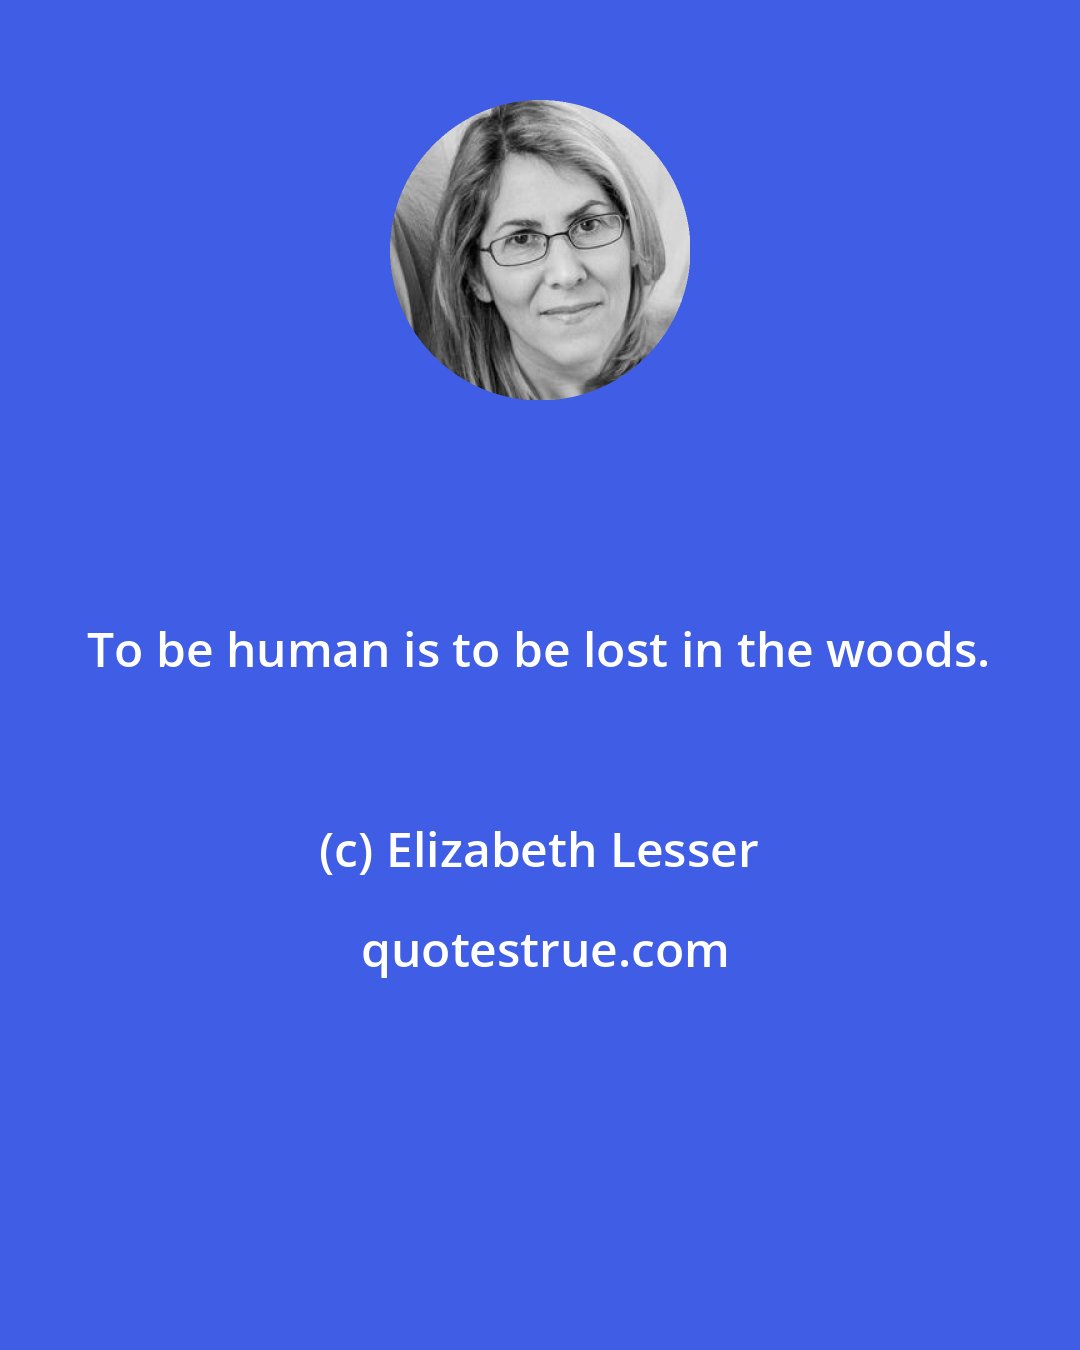 Elizabeth Lesser: To be human is to be lost in the woods.